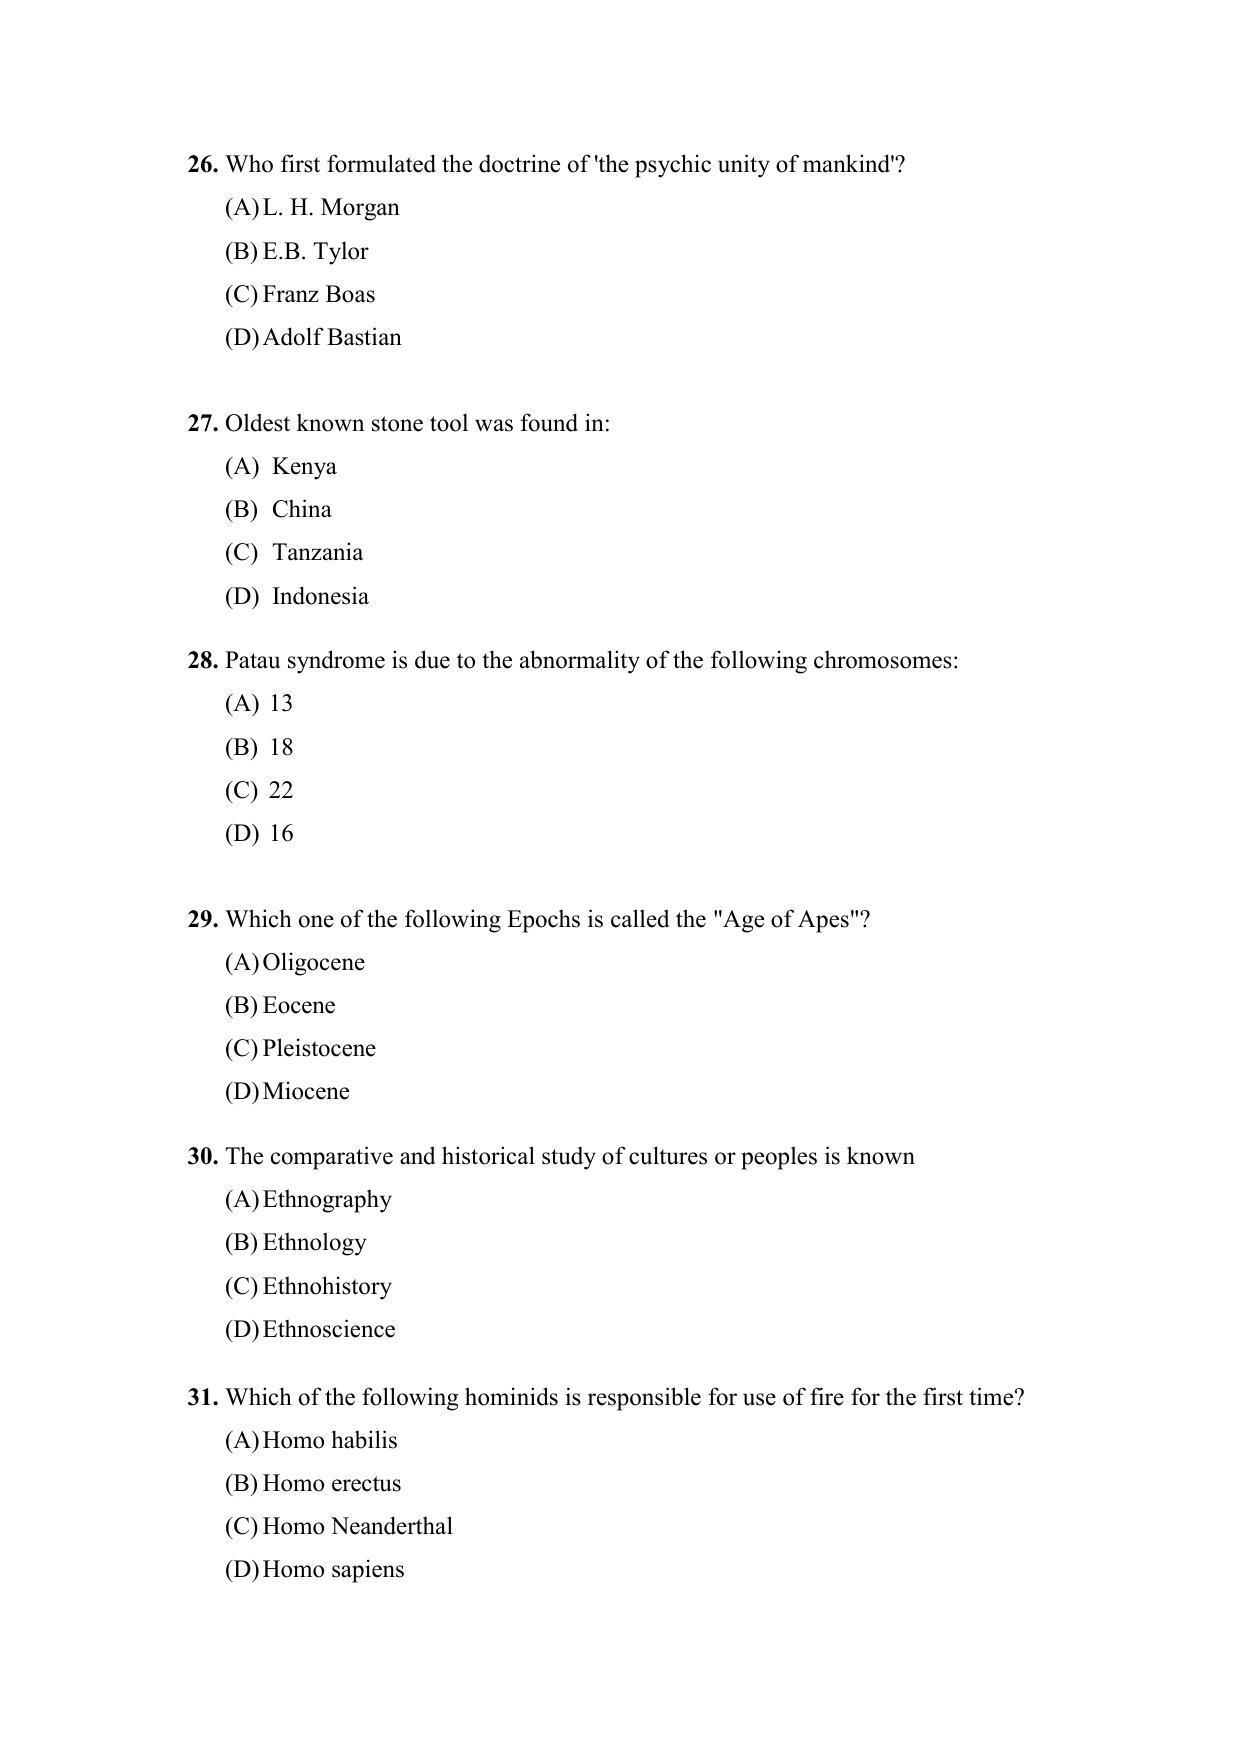 PU MPET Anthropology 2022 Question Papers - Page 6